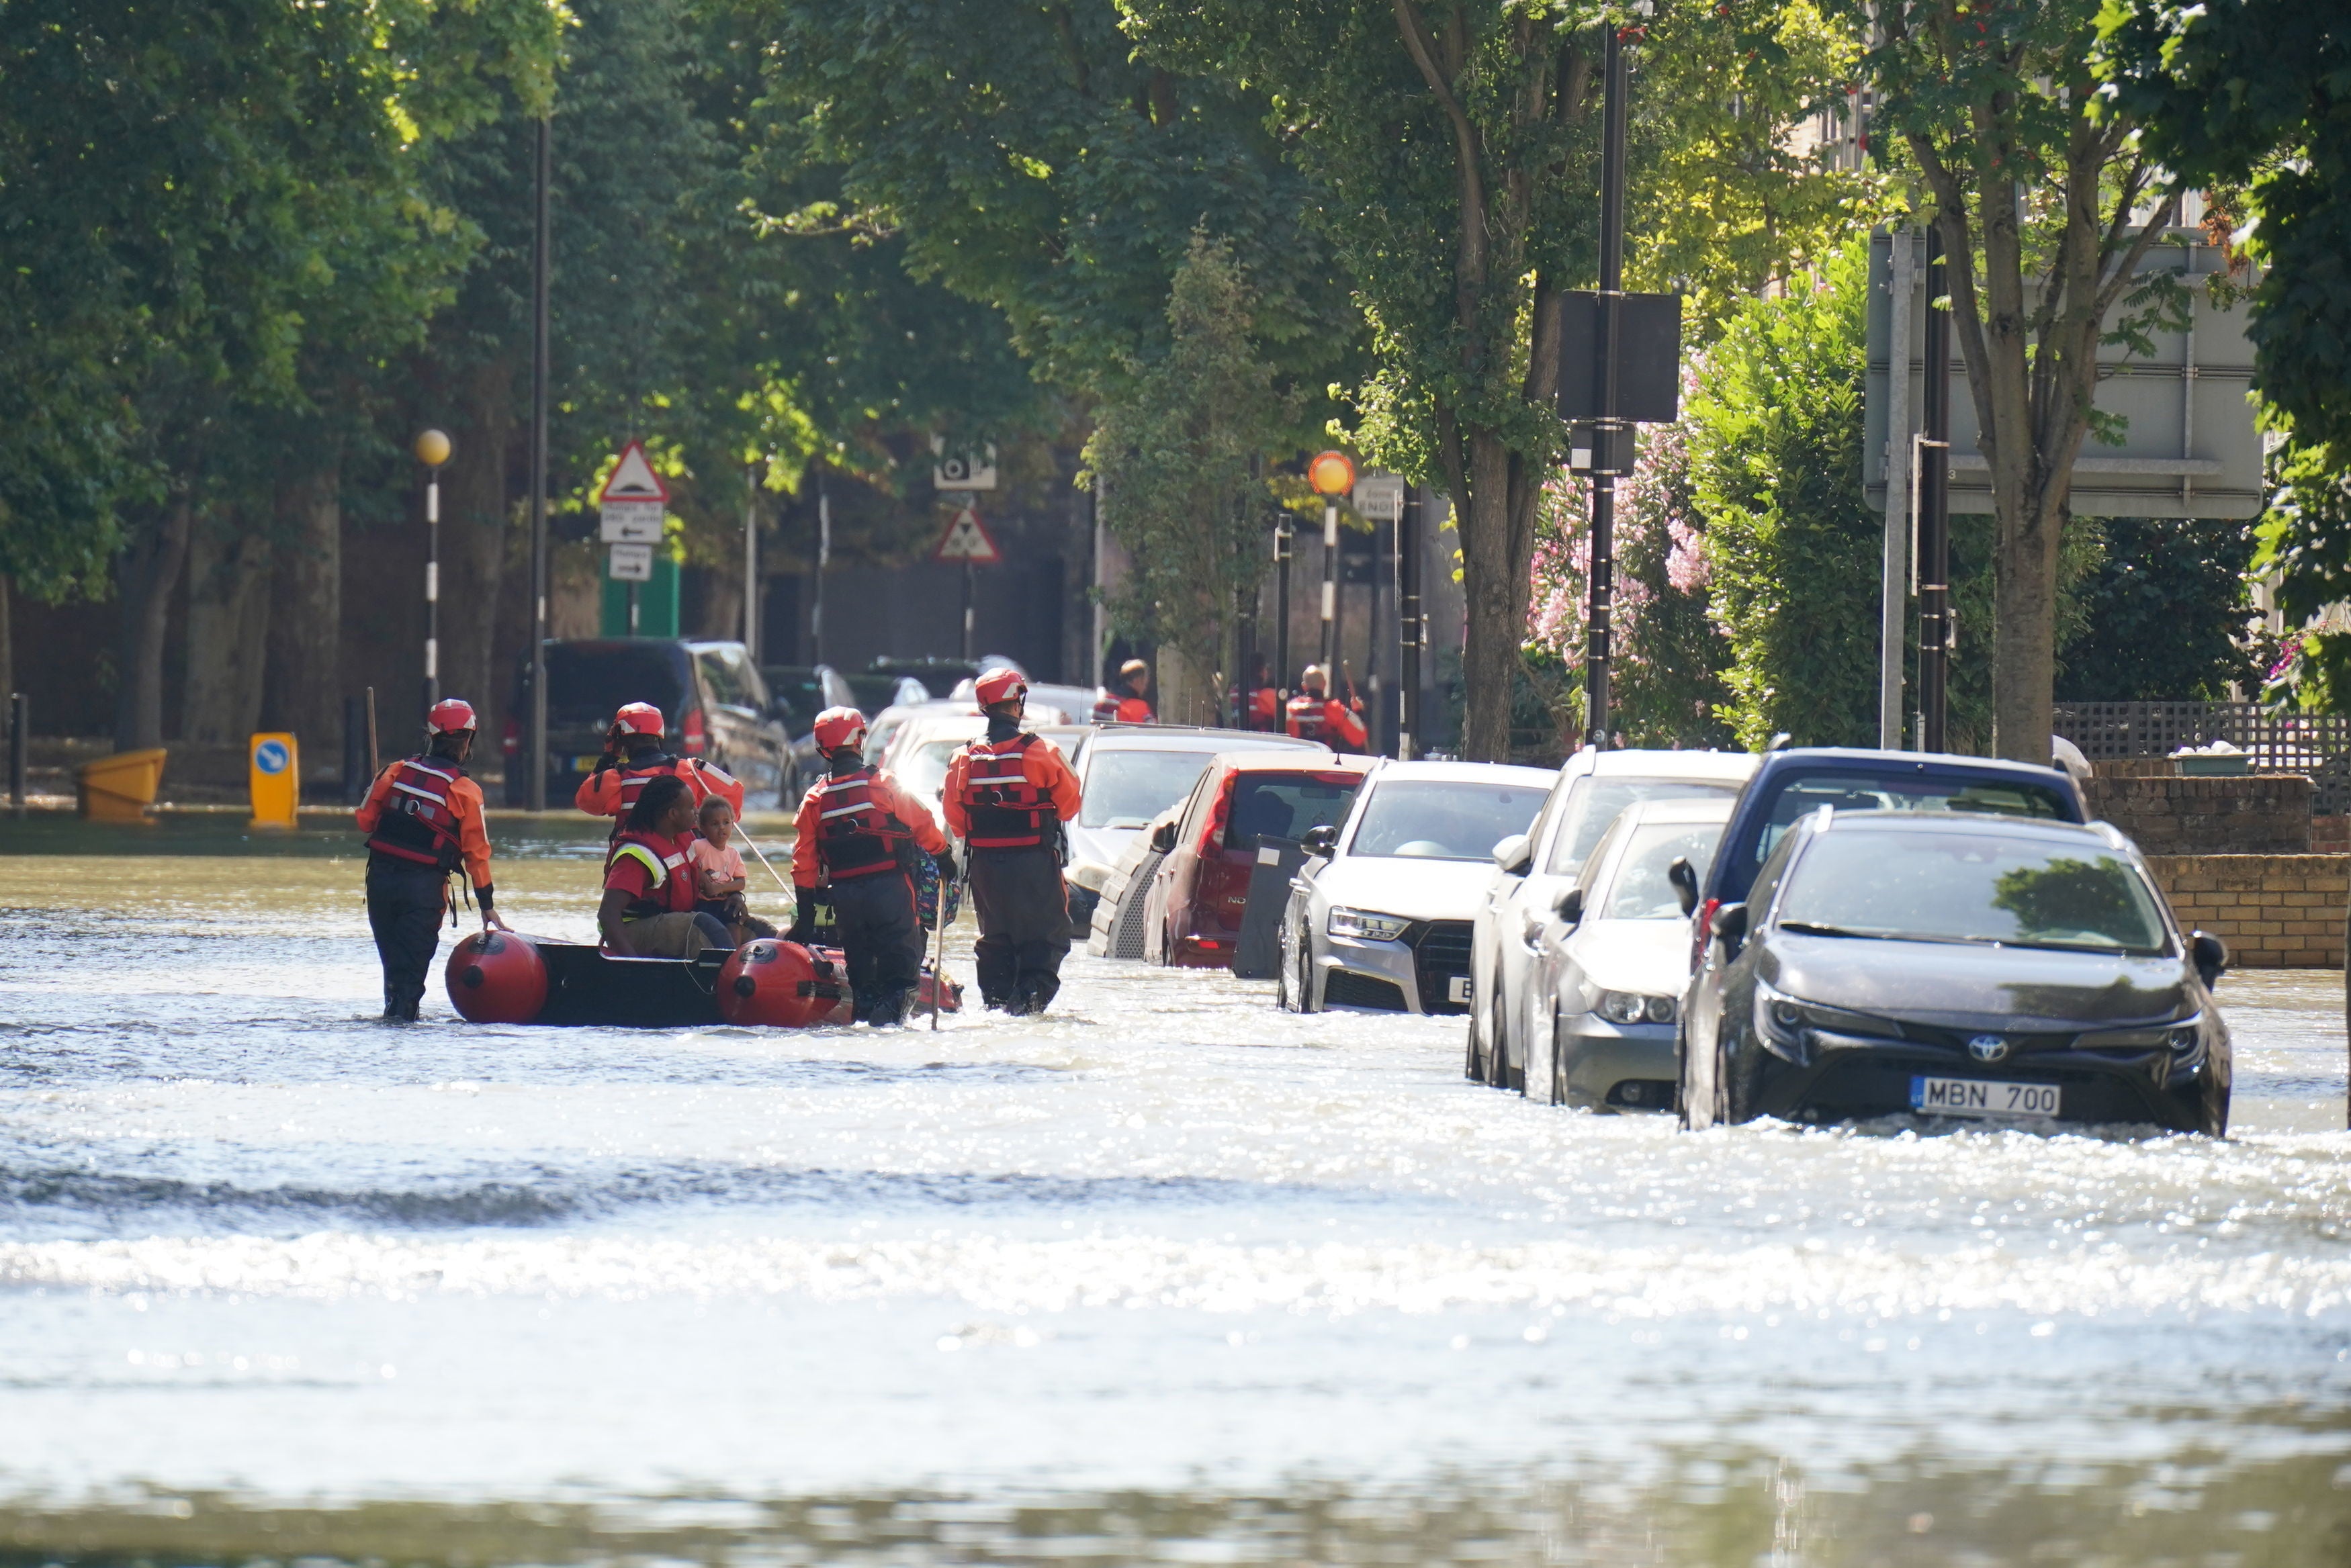 London Fire Brigade help ferry local residents along Hornsey Road in north London on 8 August, after a water main burst, causing flooding up to four feet deep